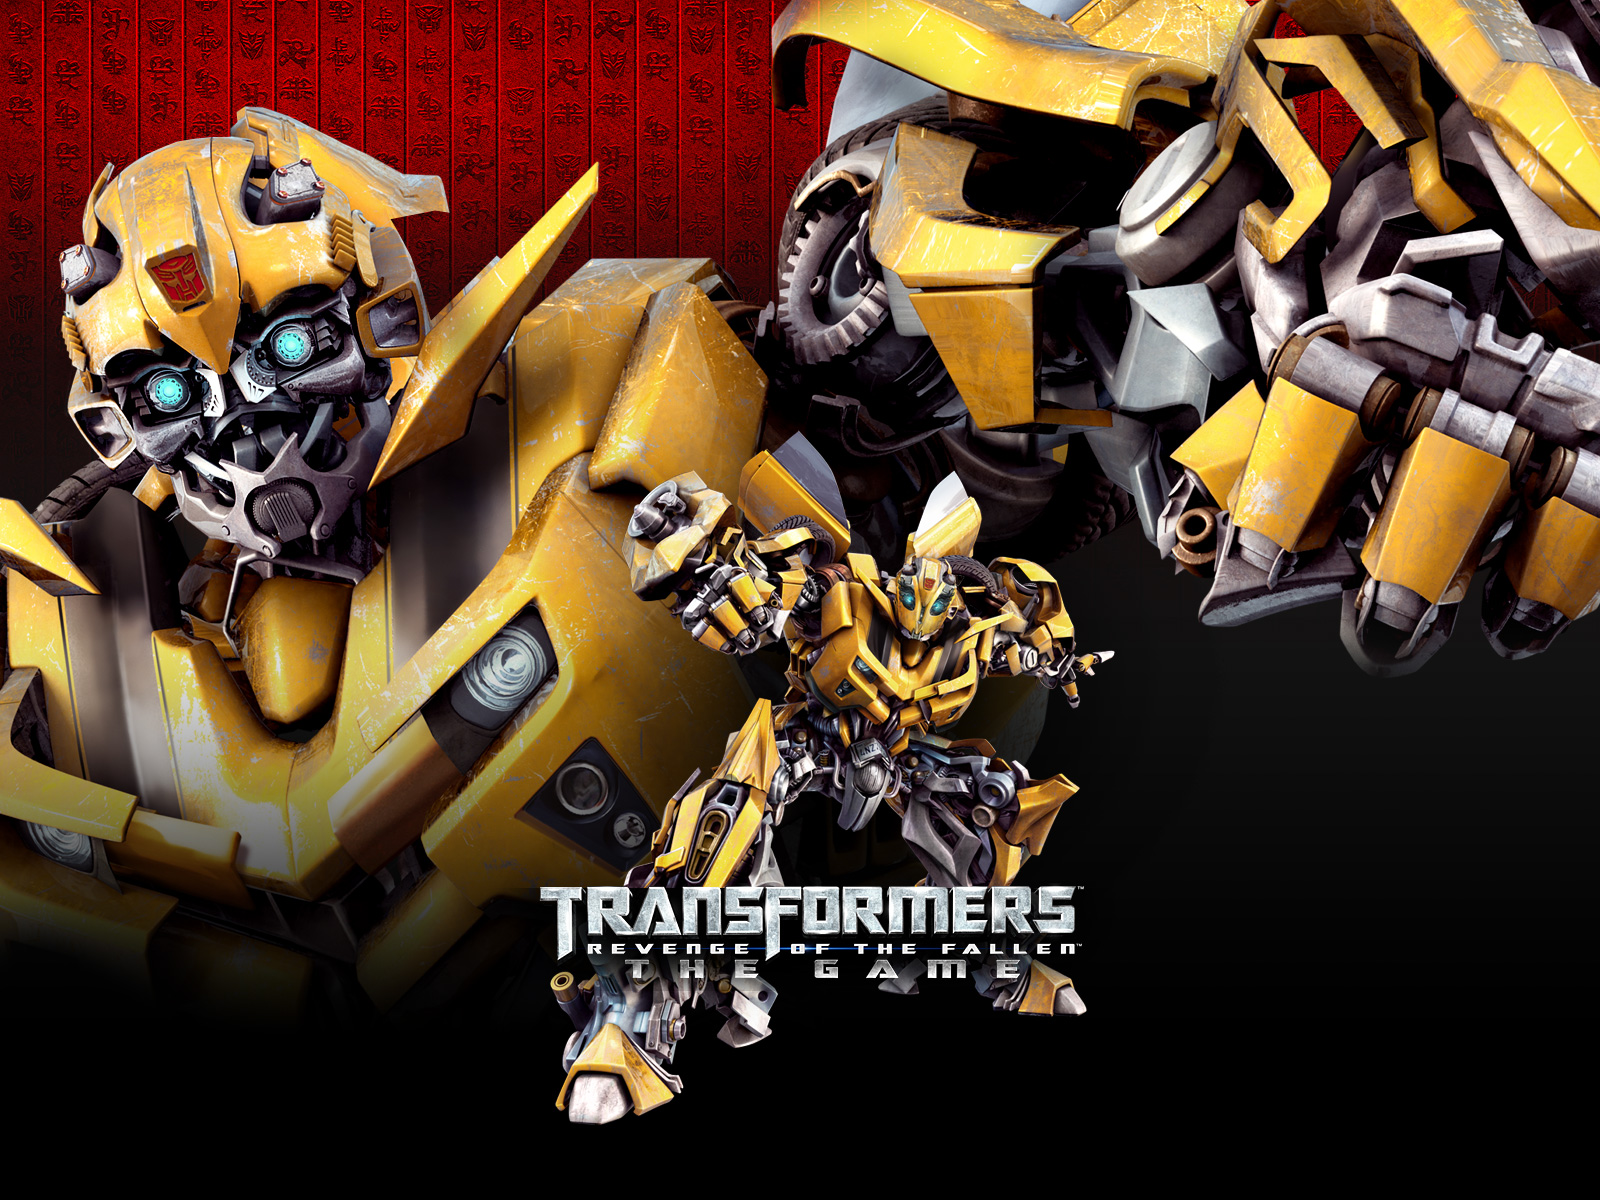 Download HQ Transformers 2 Revenge Of The Fallen wallpaper / Movies / 1600x1200